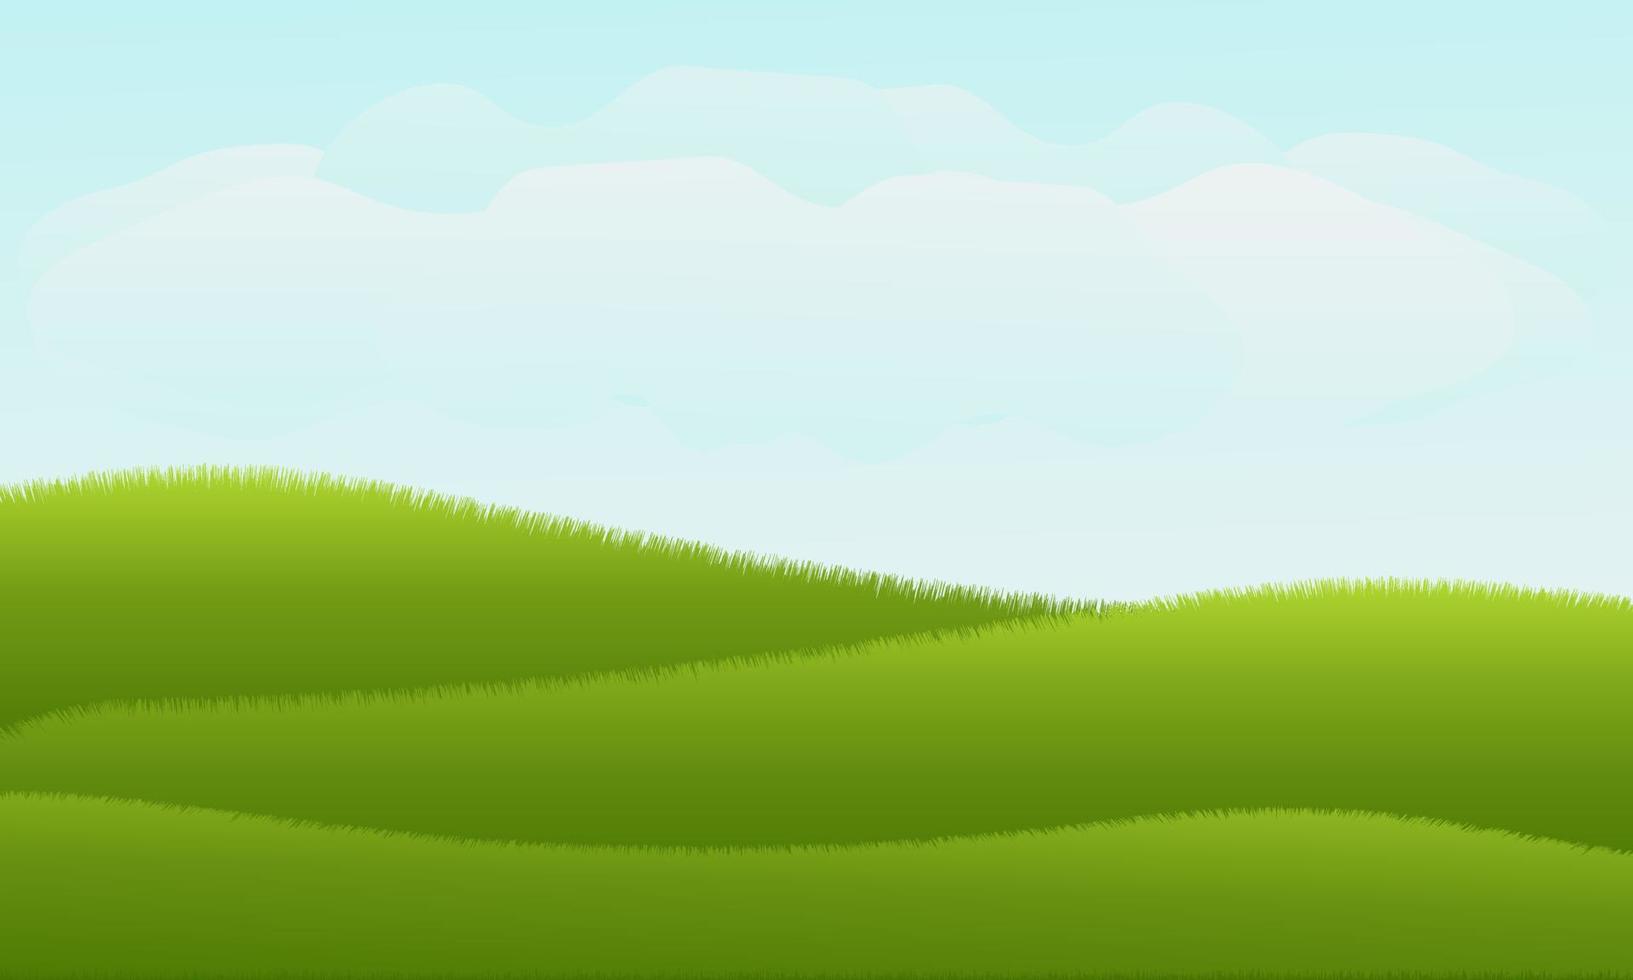 clear blue sky and hill scenery background illustration vector